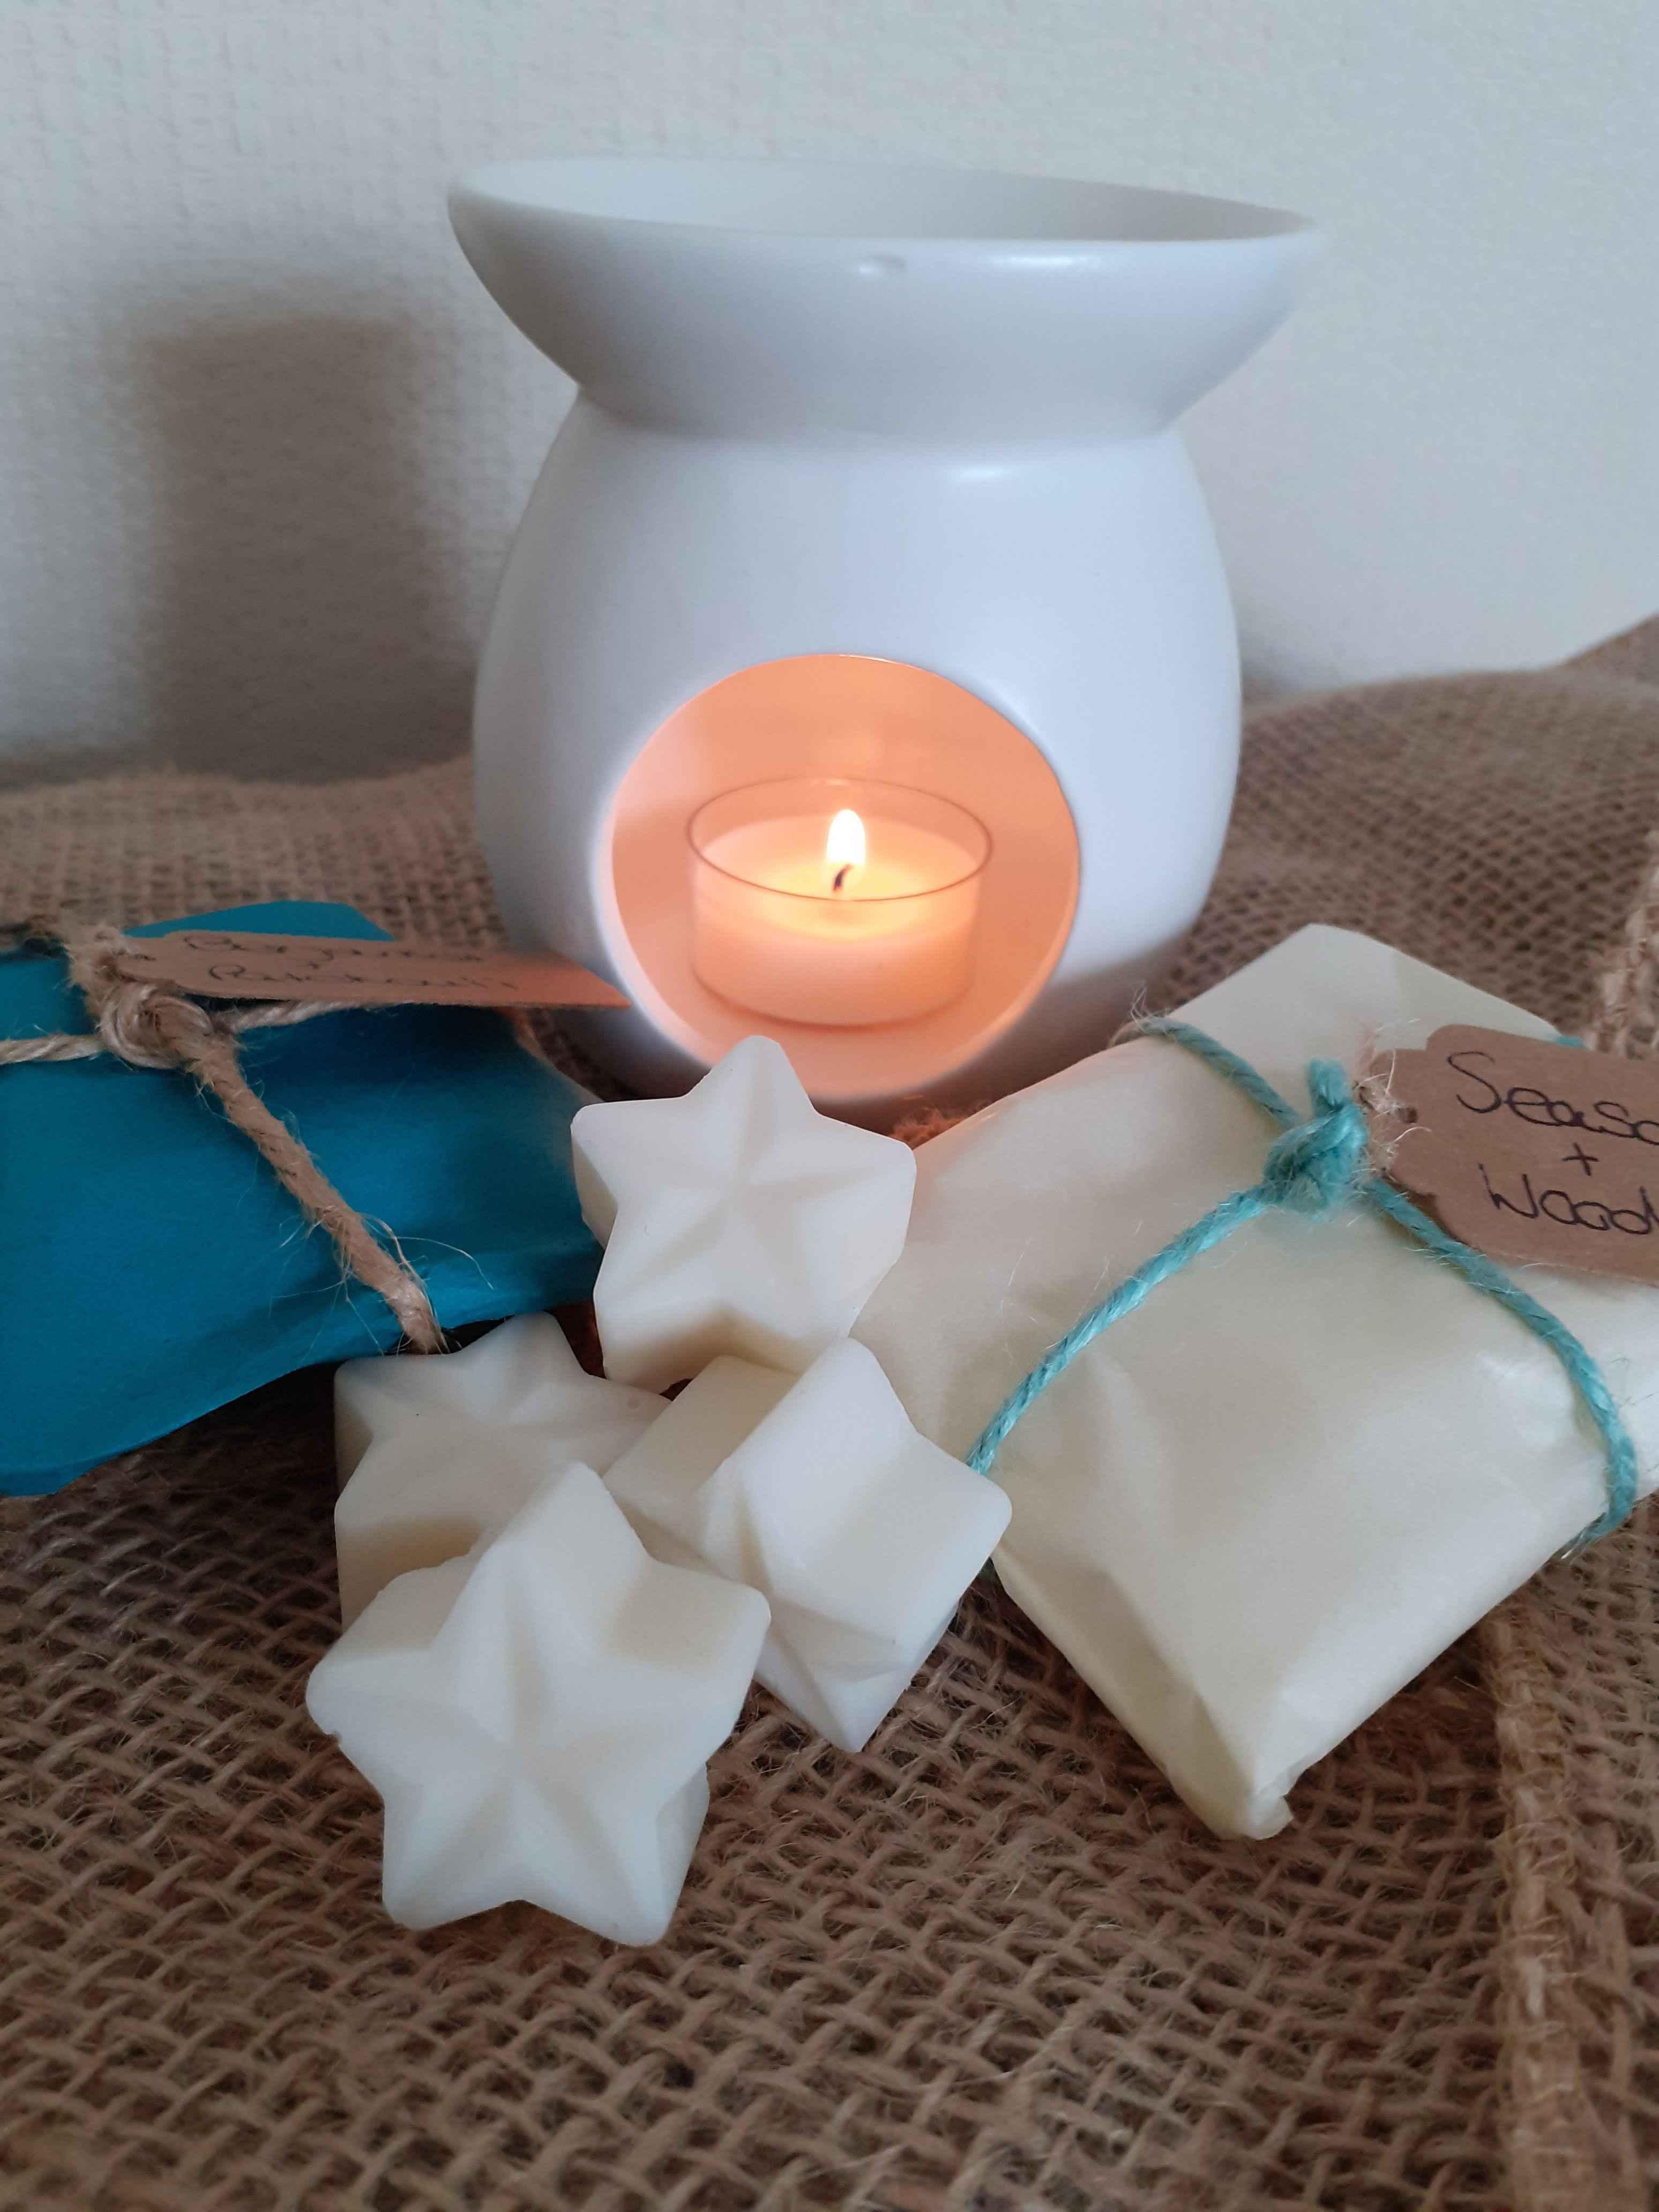 The Beach Soy Wax Melts Gift Set